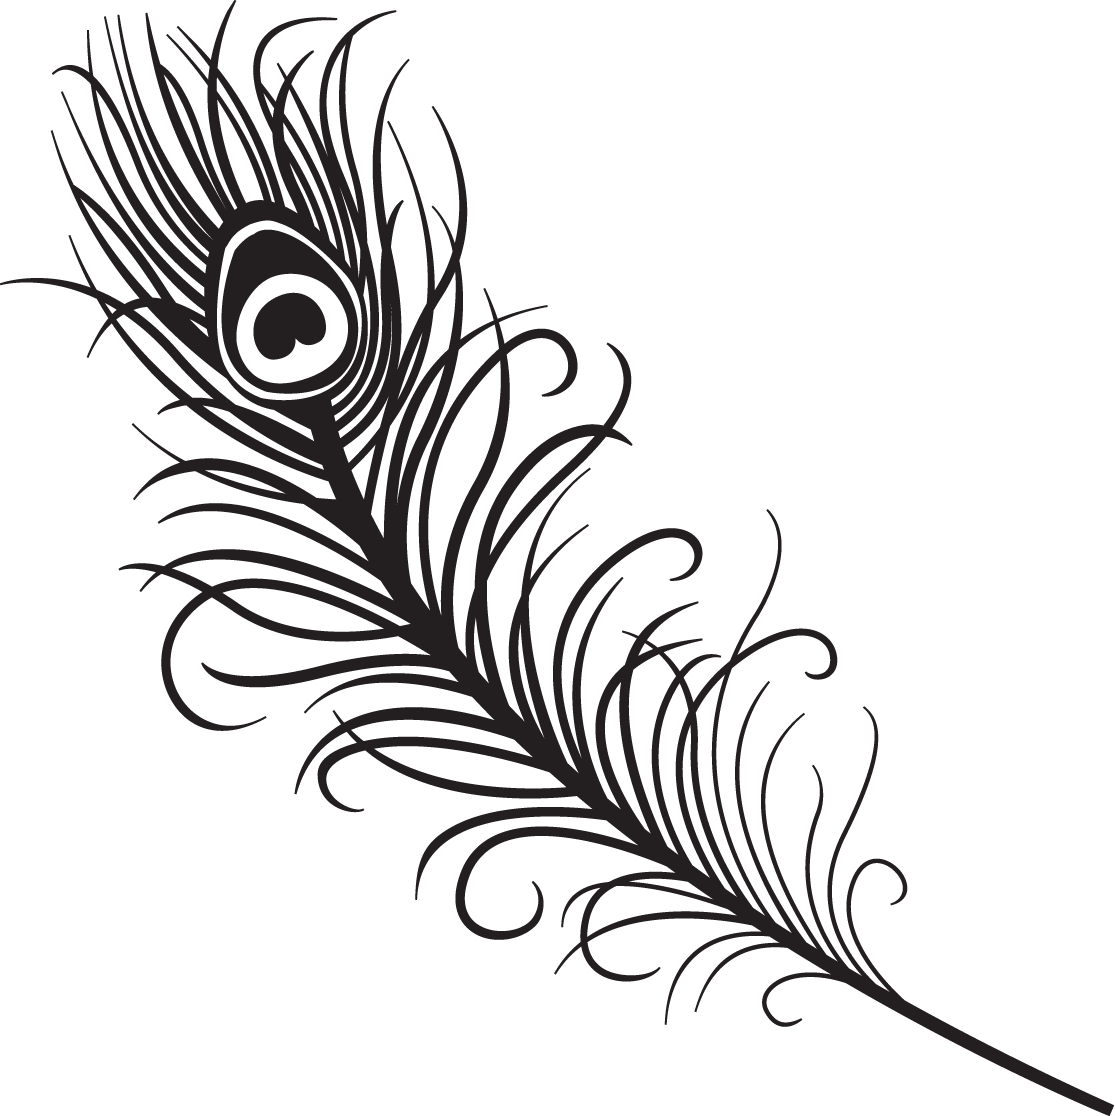 Peacock Feather Clipart Black And White | Clipart Panda - Free ...